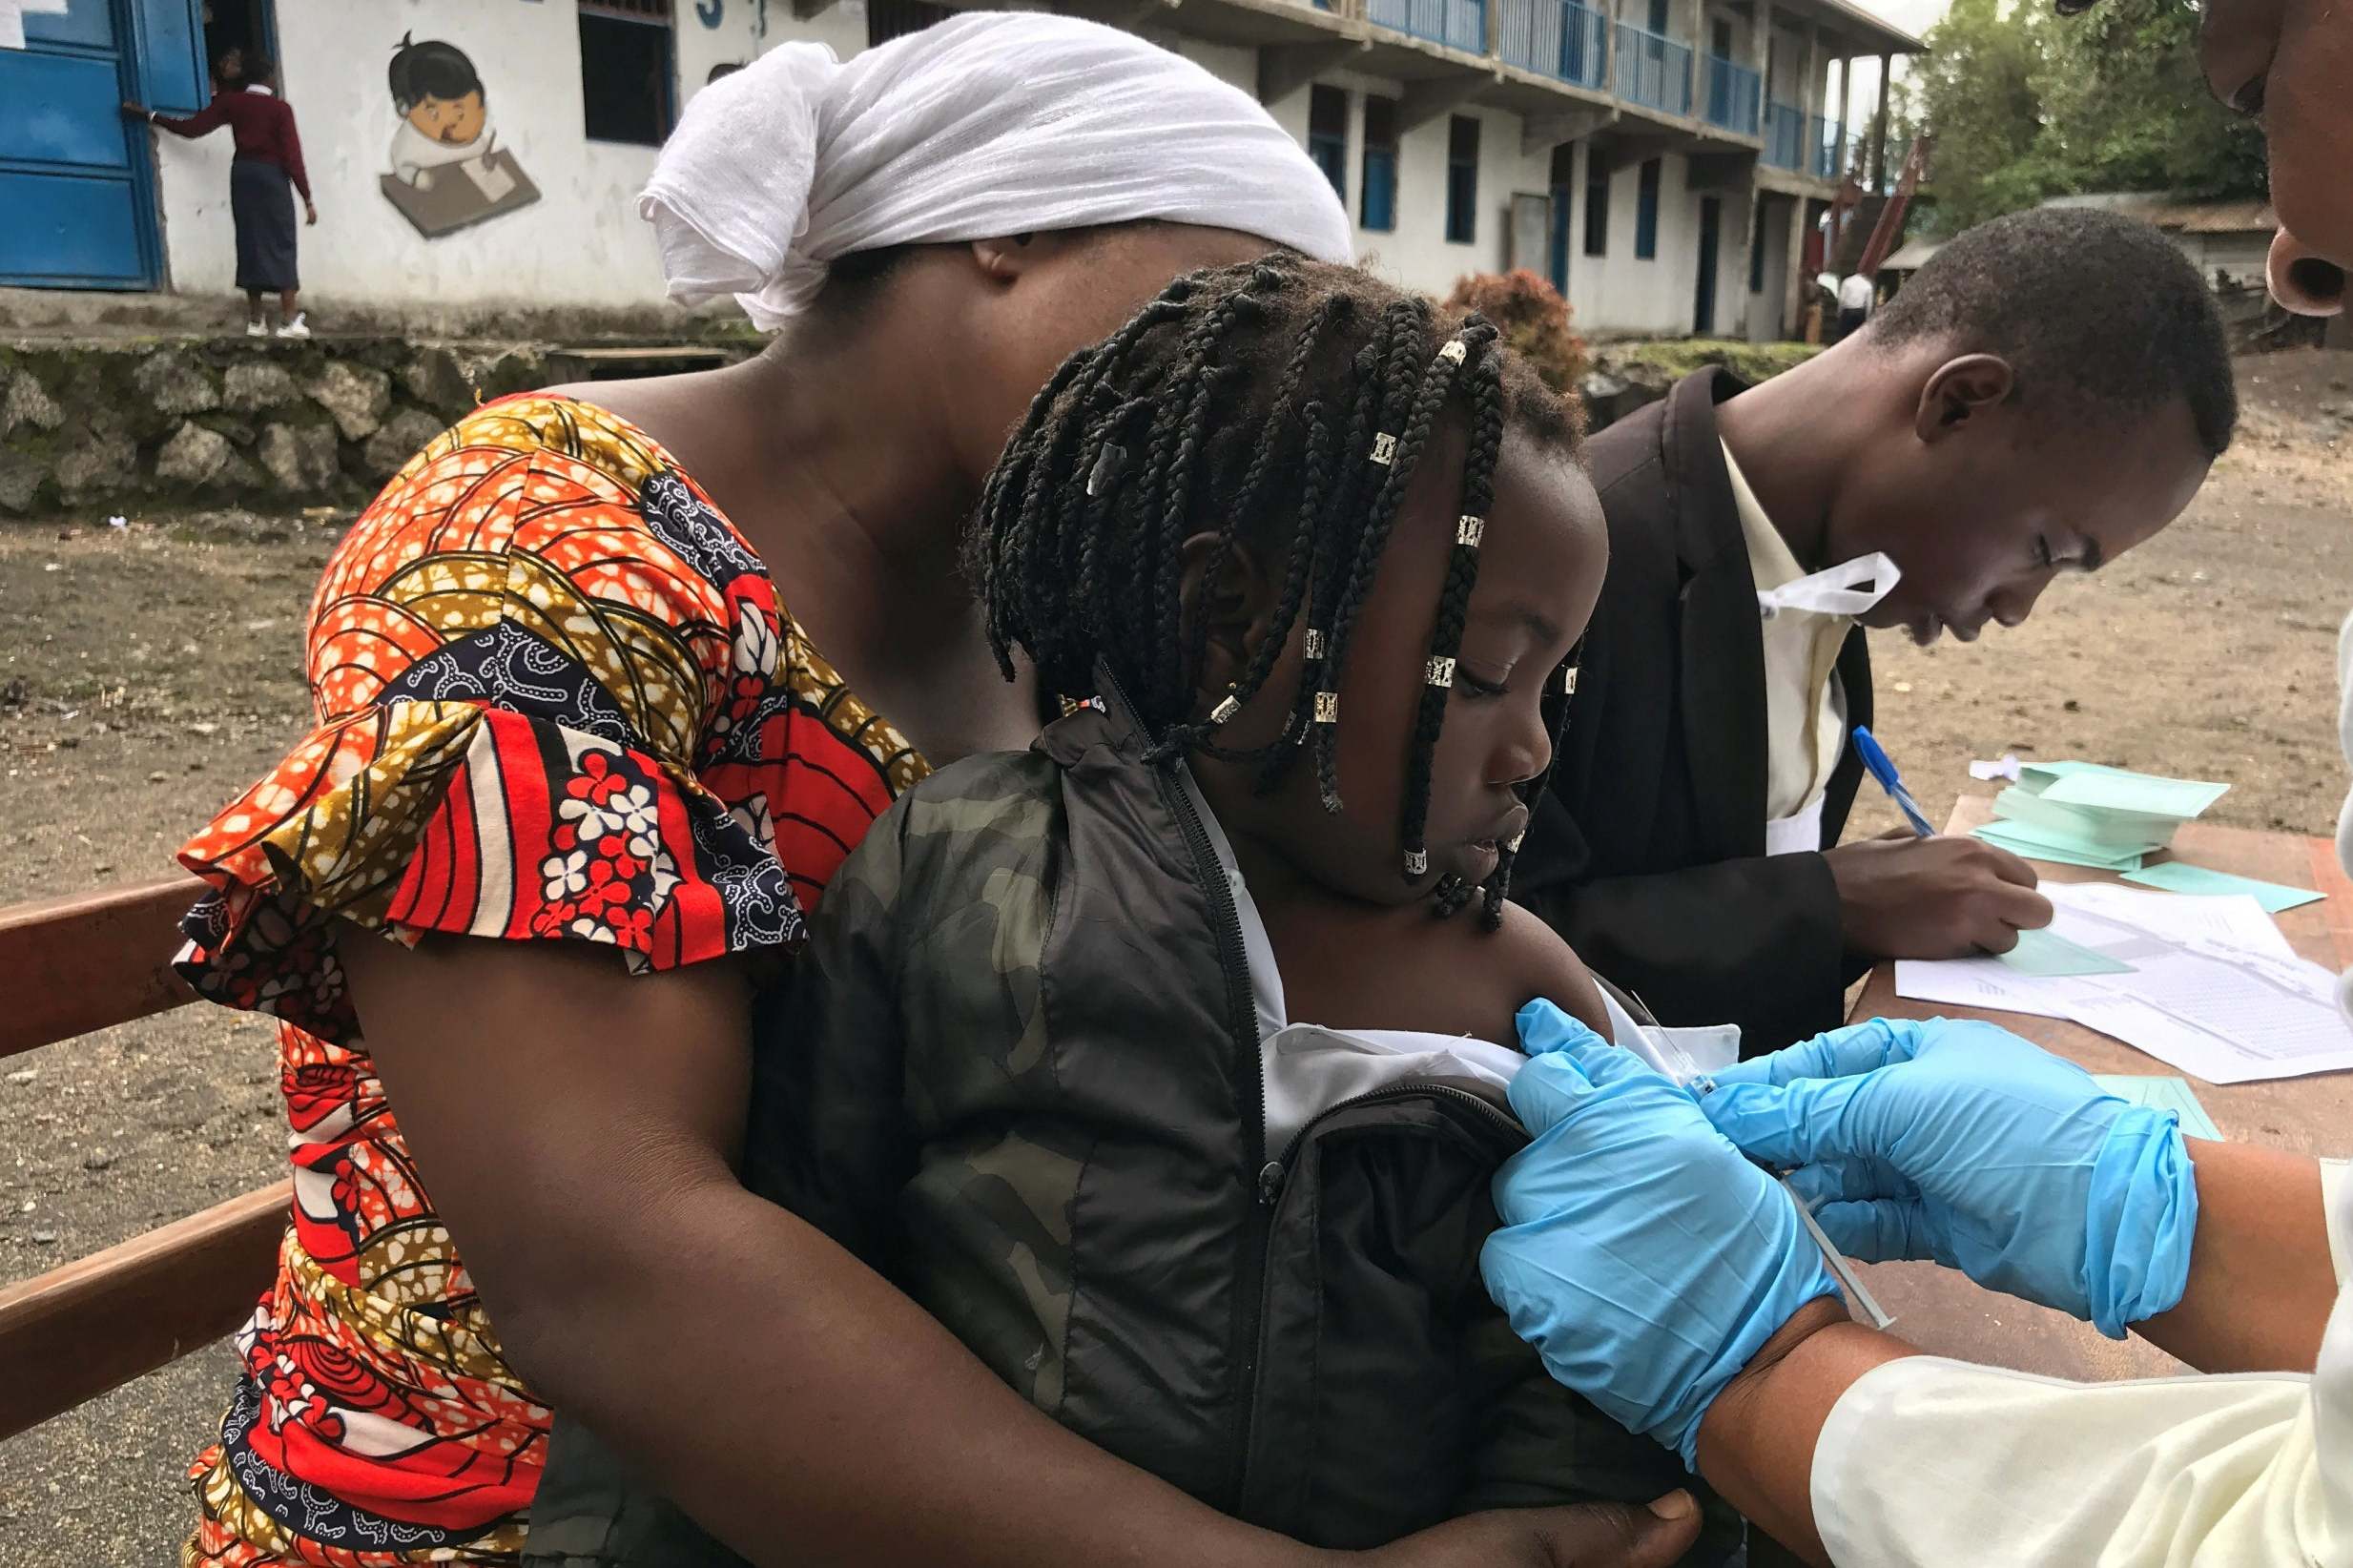 Health workers vaccinate a girl against measles at a school in eastern Congolese town of Goma